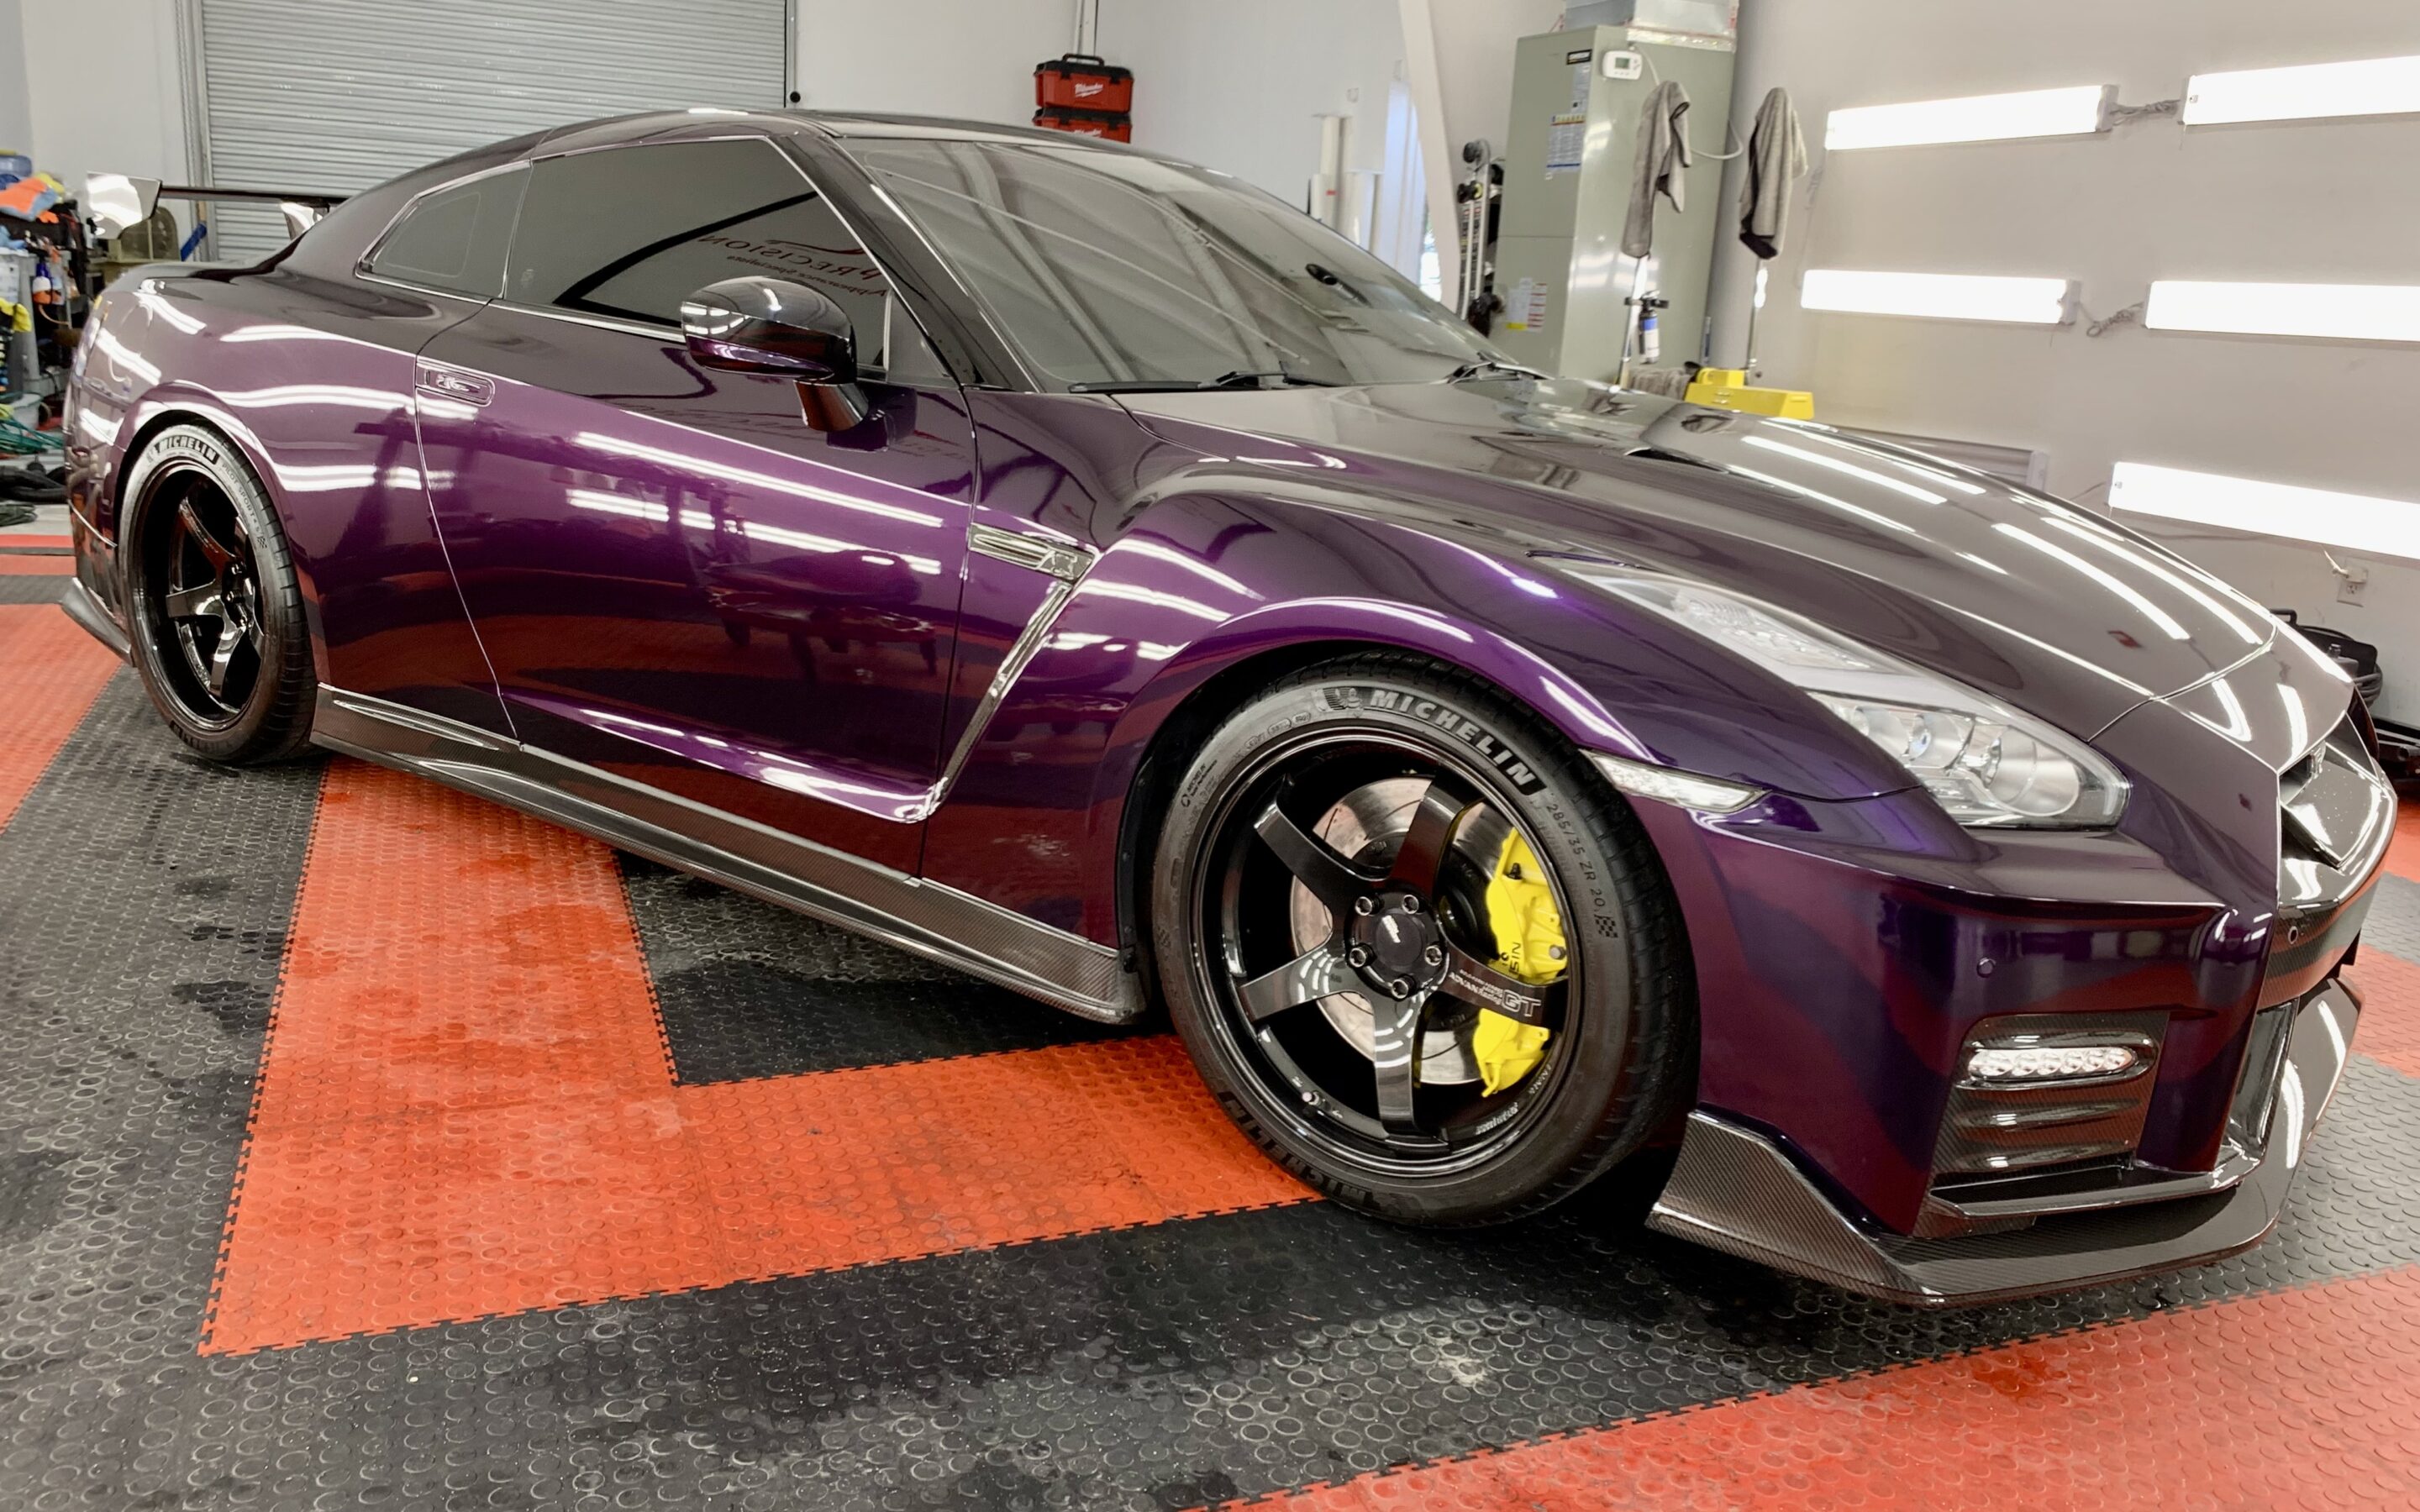 Ceramic Coating of a 2018 Nissan GT-R